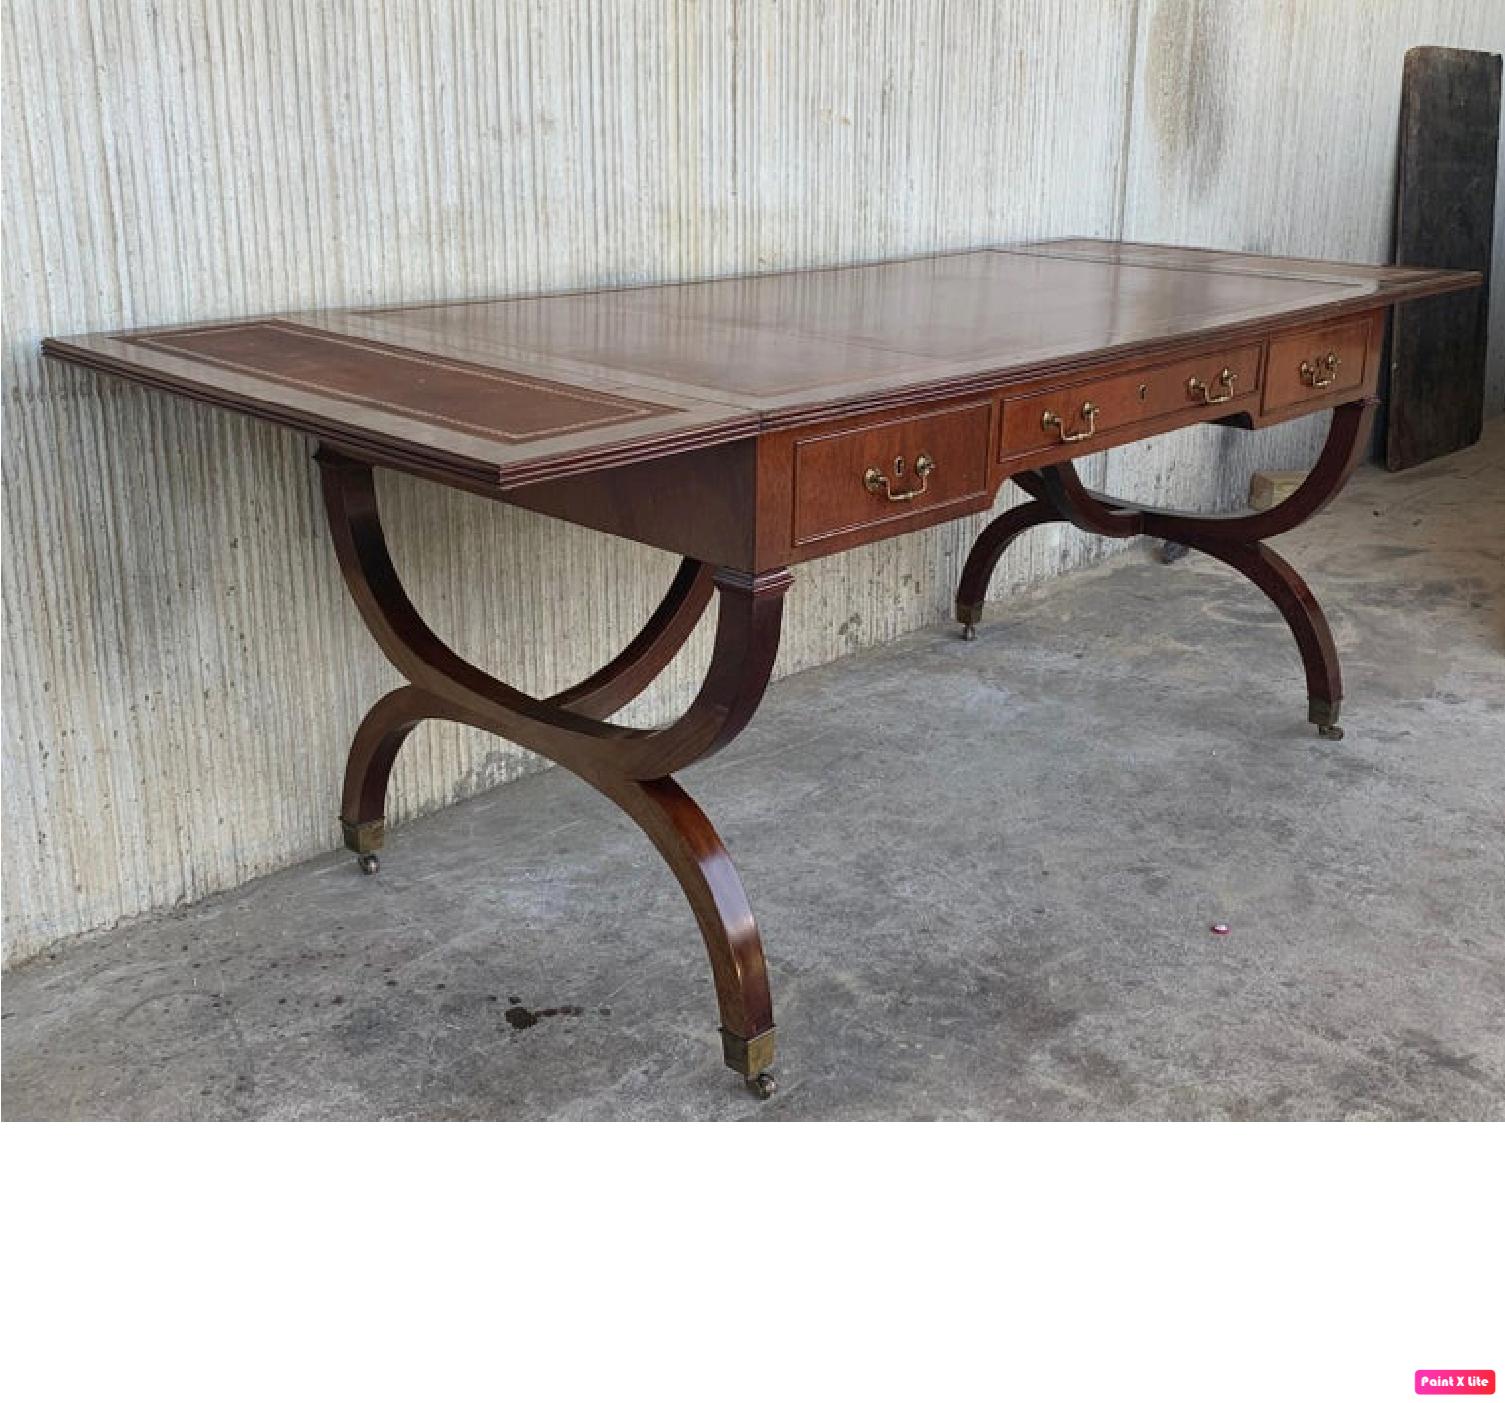 20th Century Stunning Victorian Library Writing Table or Desk Brown Leather Top Gillows Legs